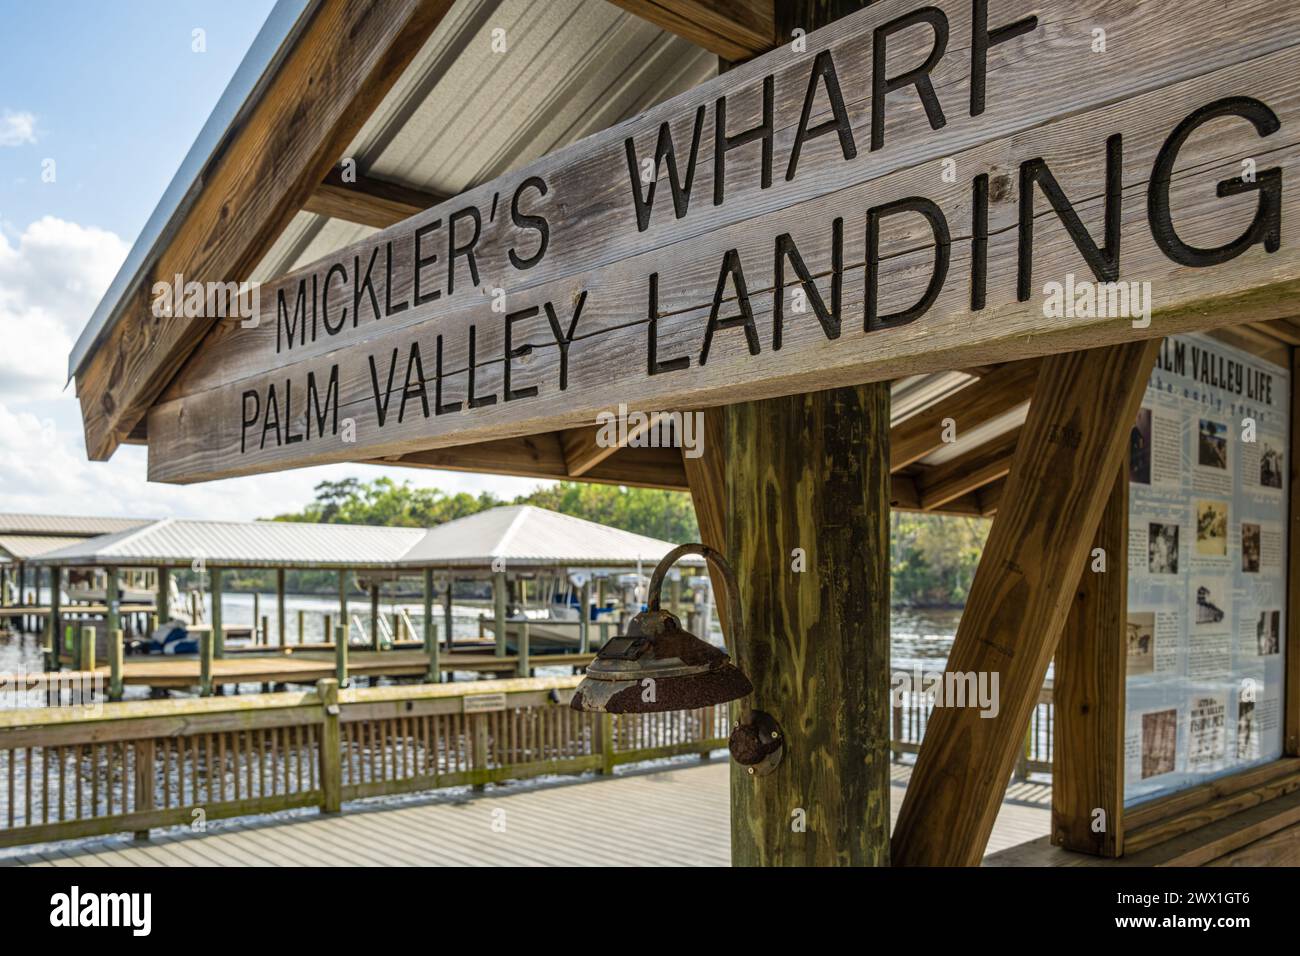 Mickler's Wharf Palm Valley Landing sull'Intracoastal Waterway a Palm Valley, Florida. (USA) Foto Stock